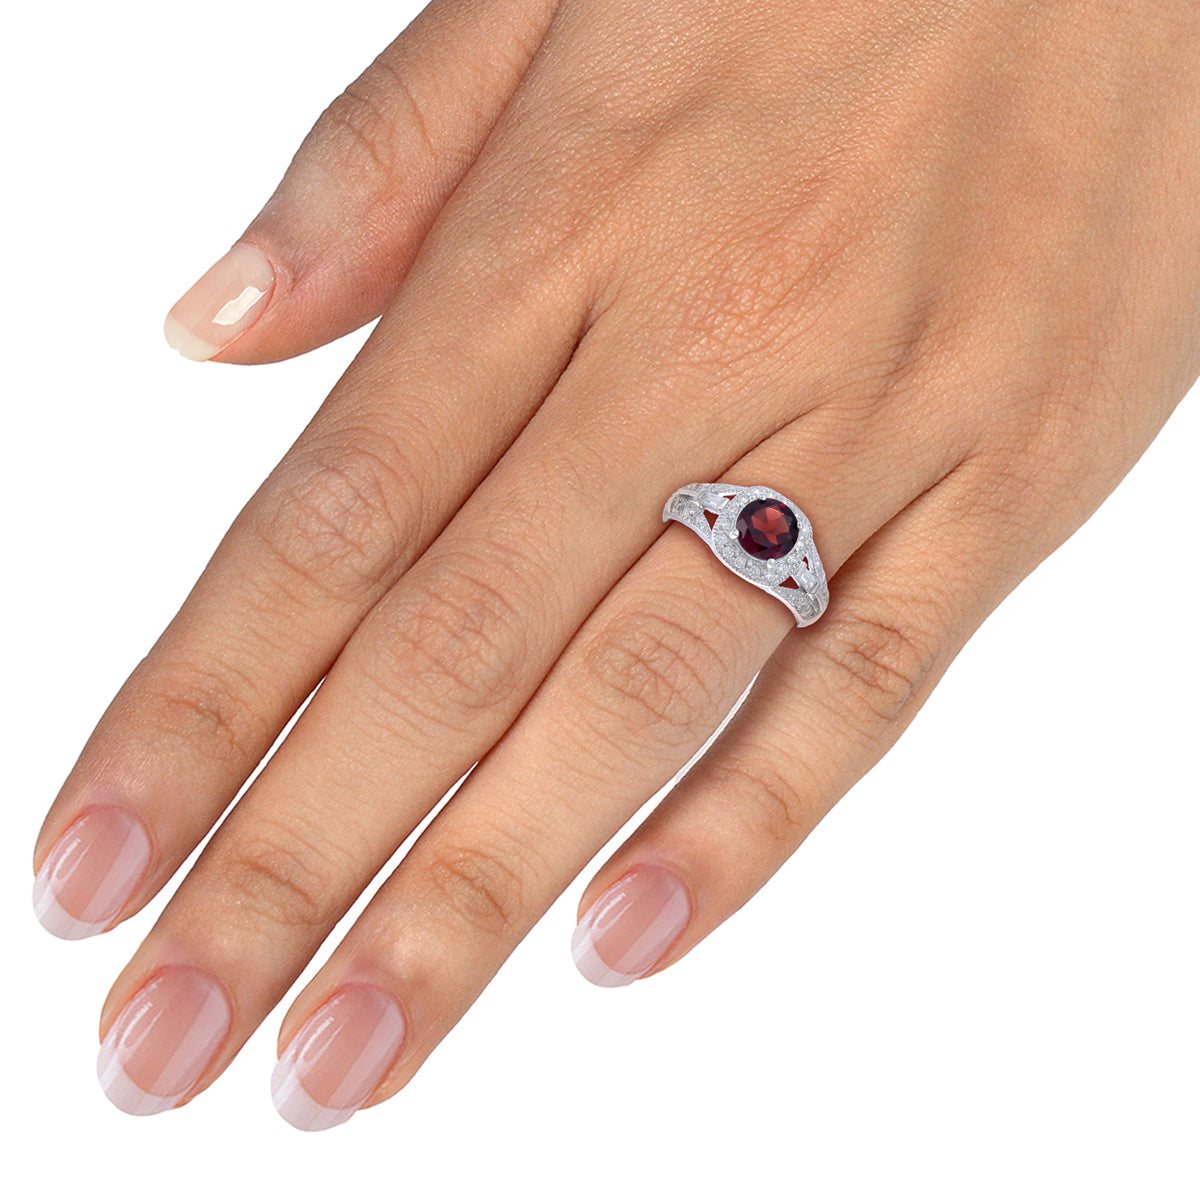 1.05 cttw Garnet Ring .925 Sterling Silver with Rhodium Plating Round Shape 7 MM